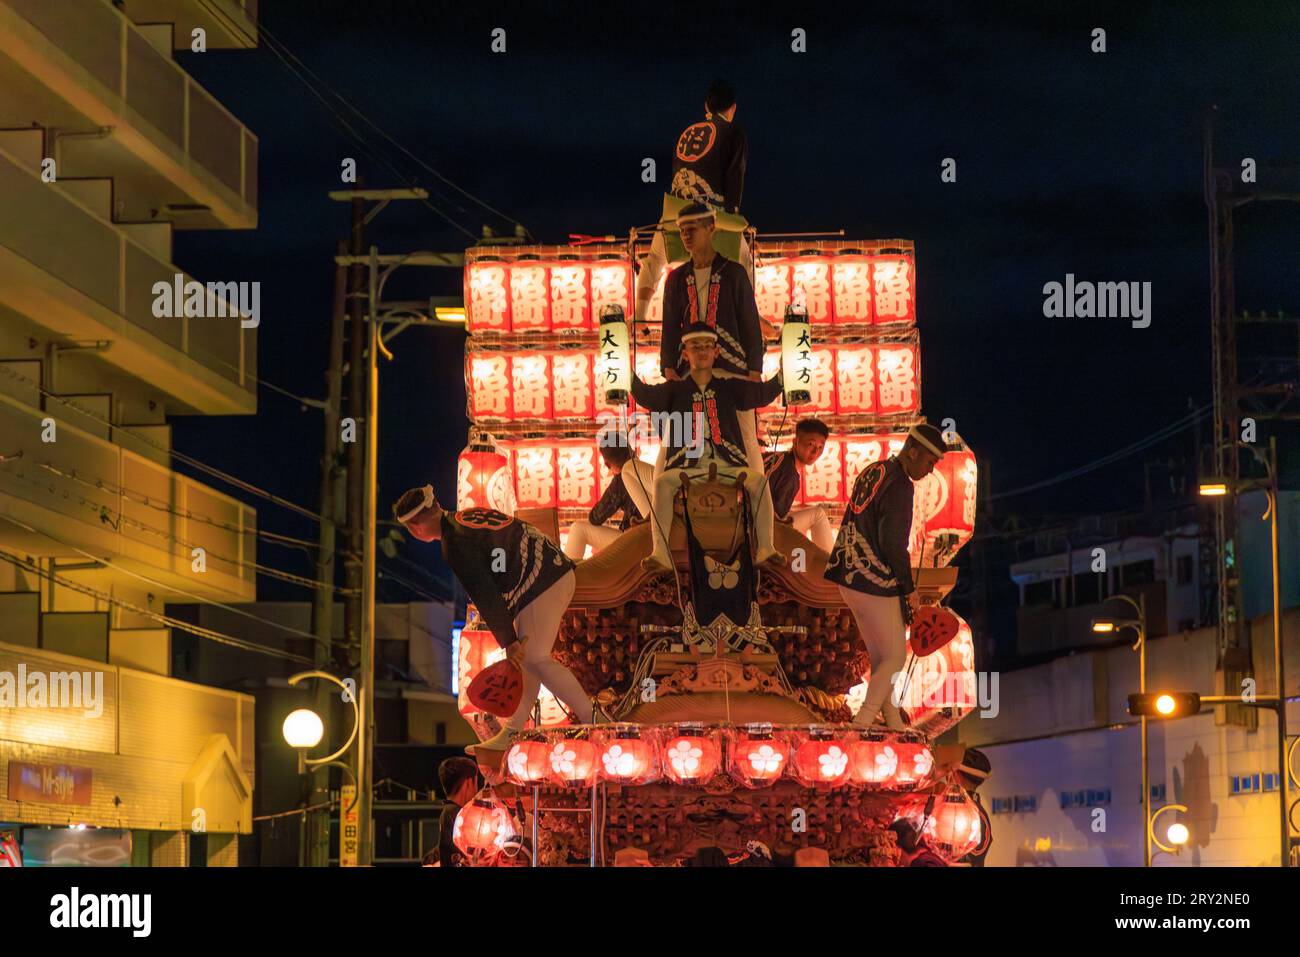 Kishiwada, Japan - September 17, 2023: Young men with lanterns and traditional clothing atop portable shrine at night festival Stock Photo